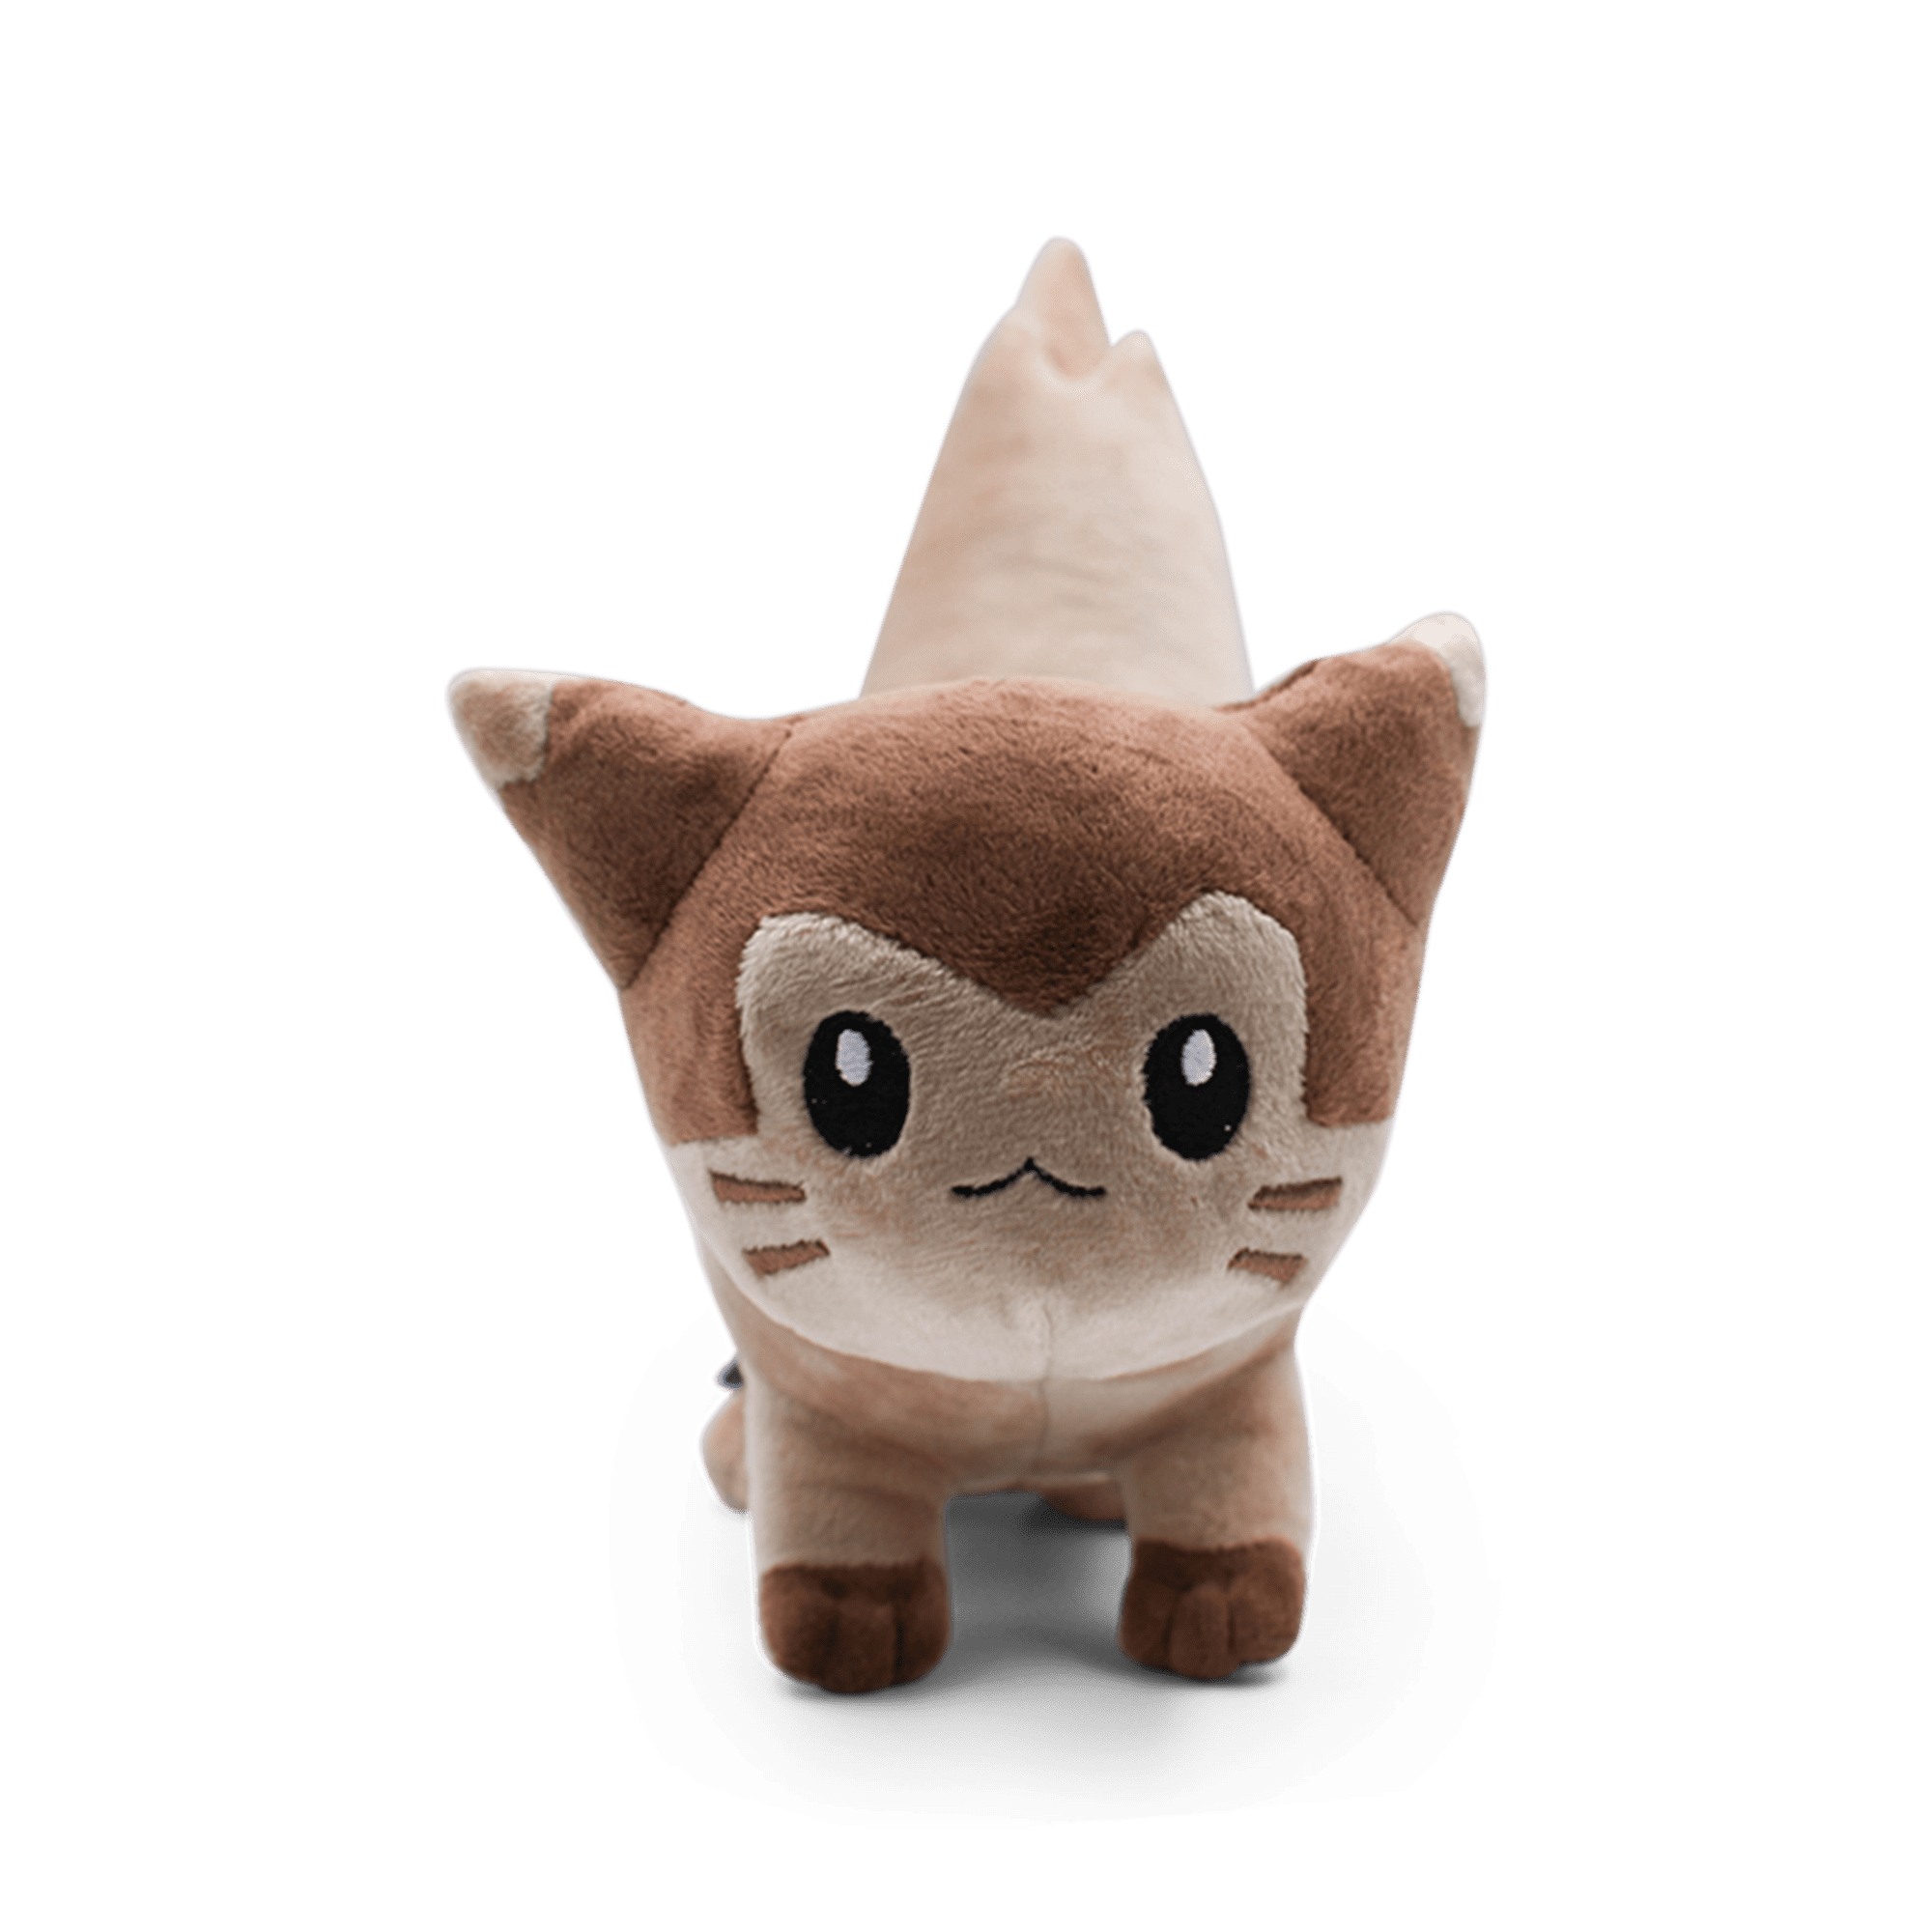 SeekFunning 19" Furret Pokémon Brown All Star Collection Plush Toys,Kids Bedding, Pillow Buddy, Great Gifts for Children